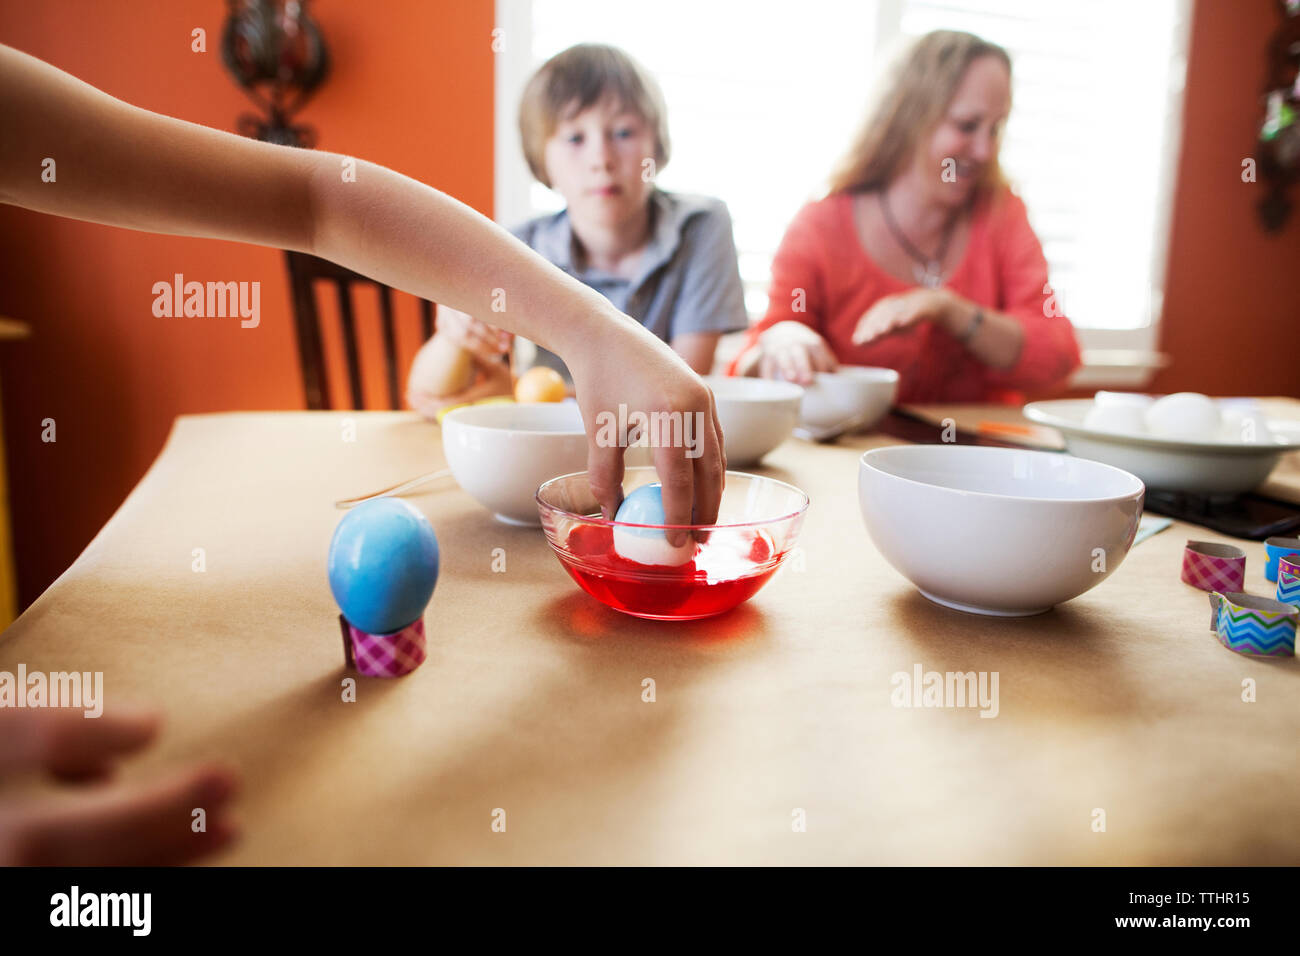 Cropped image of girl decorating Easter eggs with family at home Stock Photo